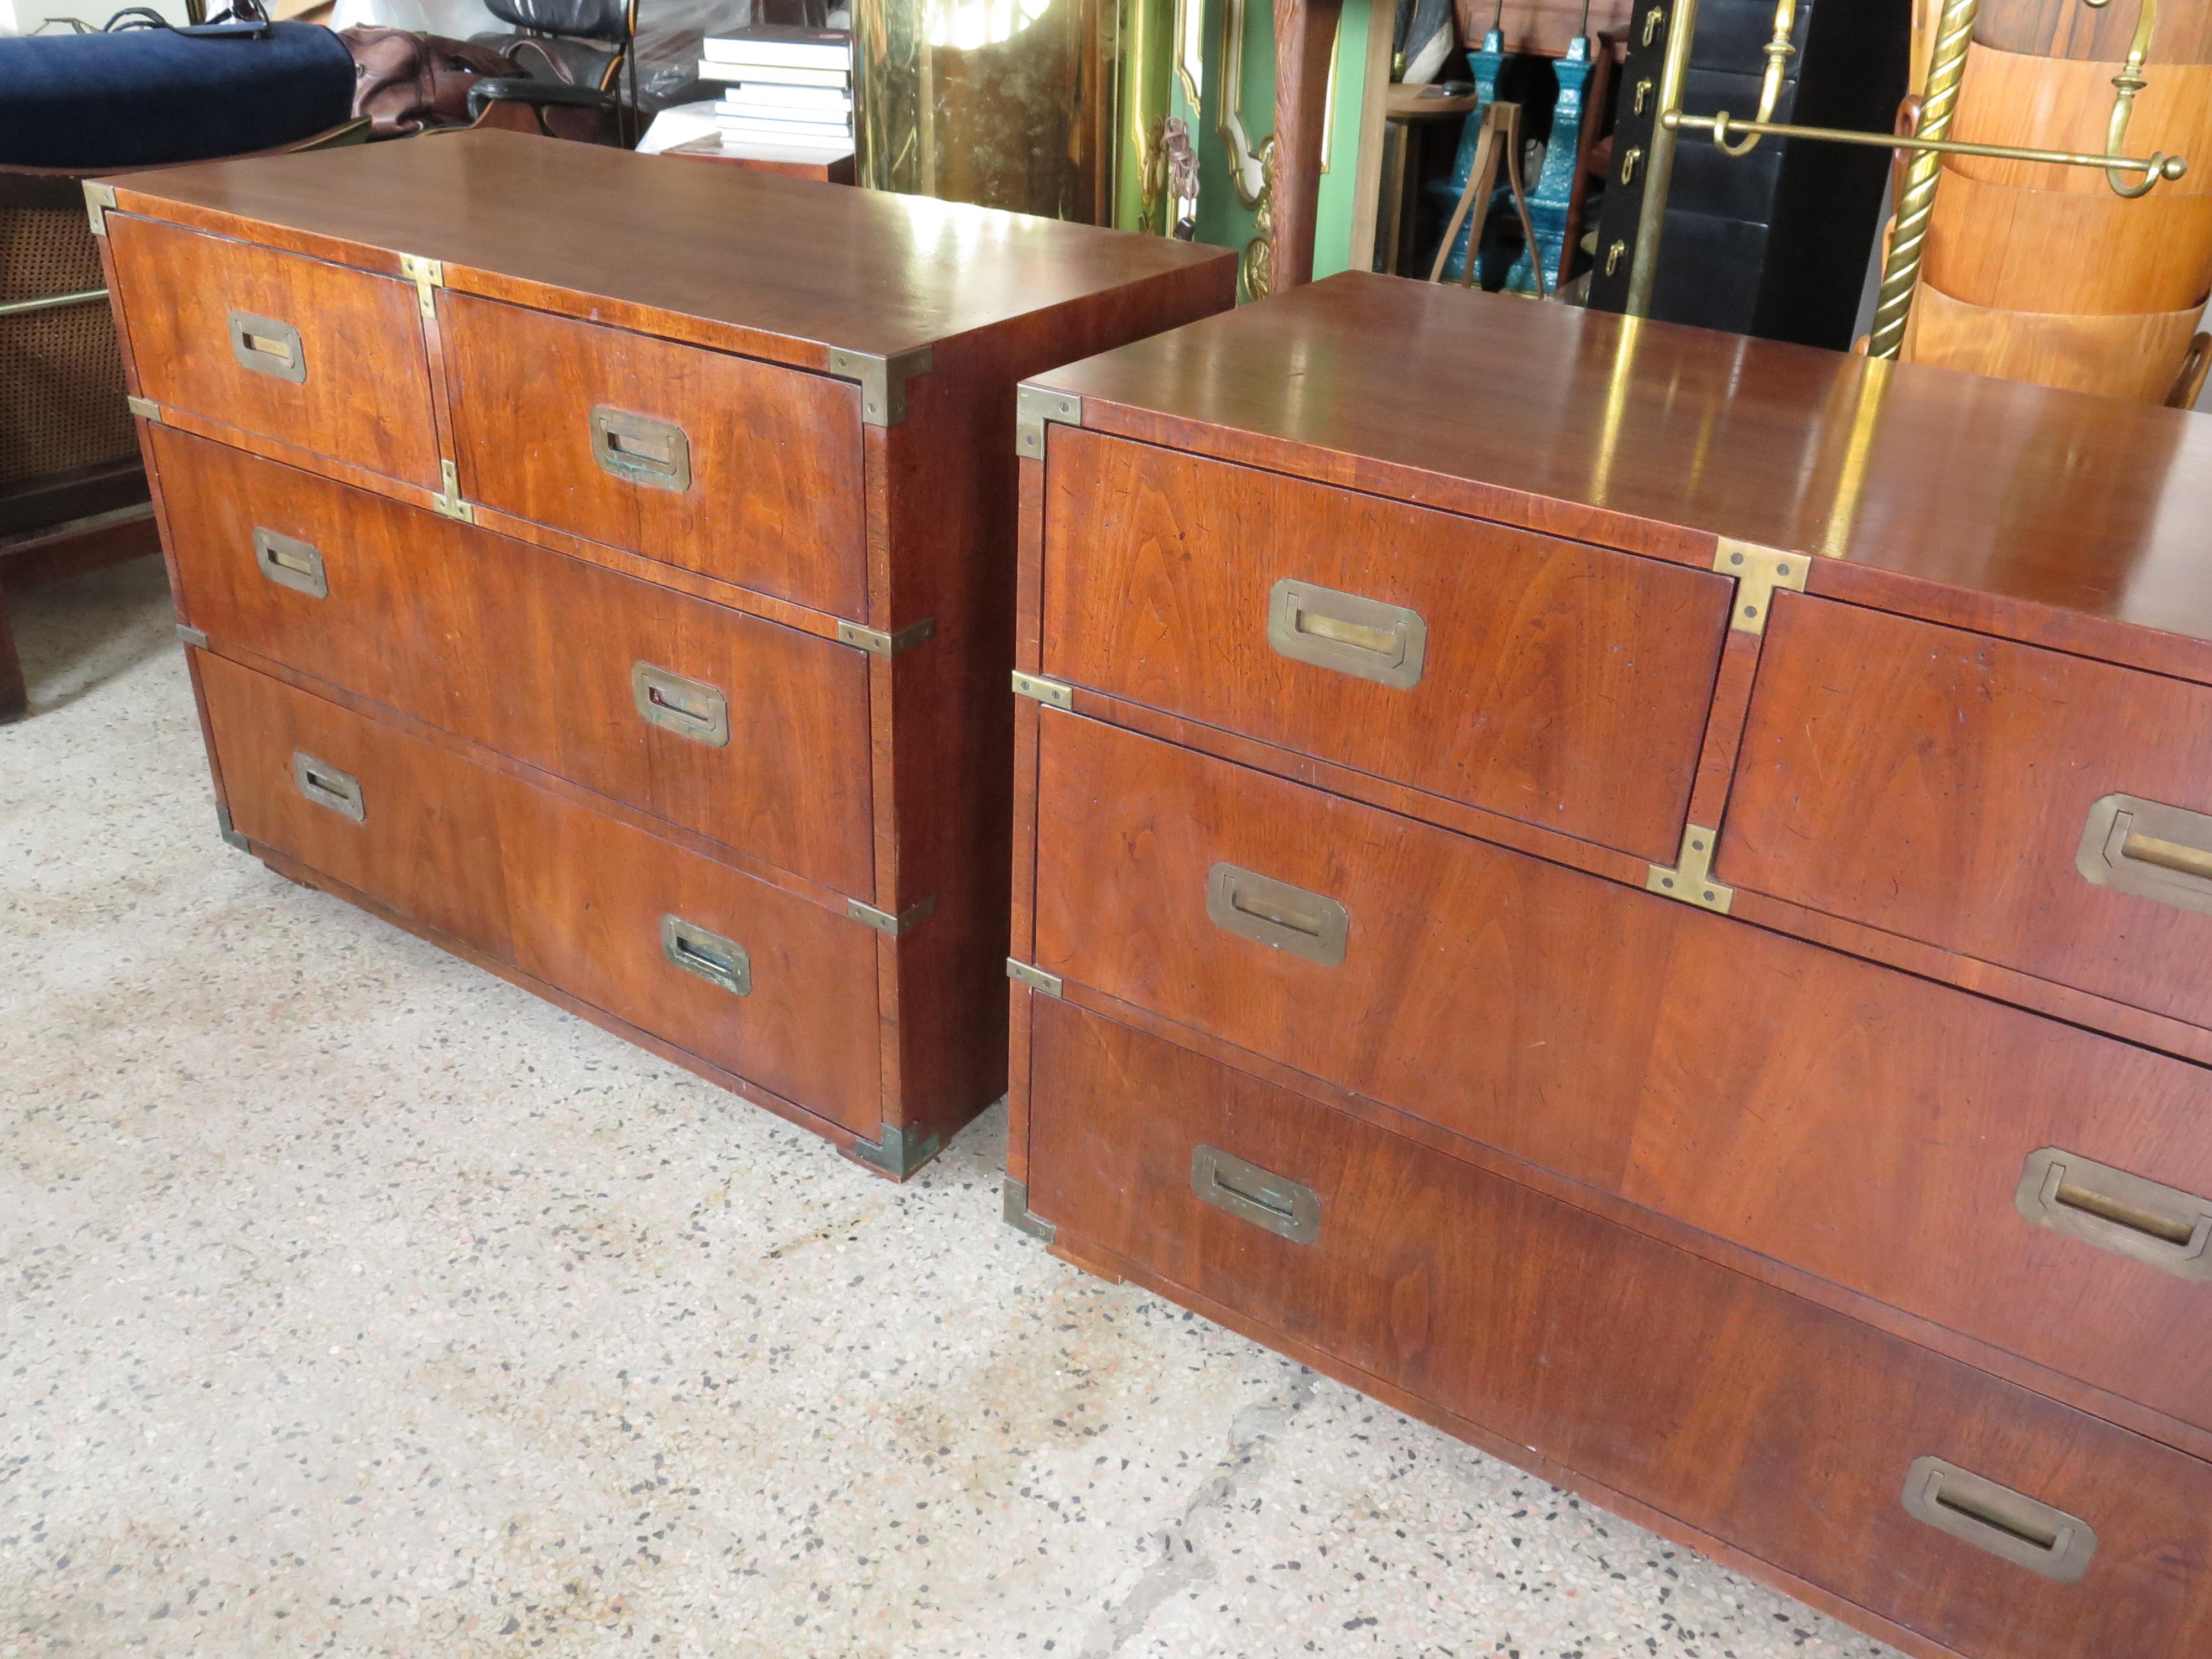 A pair of campaign style dressers by Henredon. Walnut with solid brass handles and accents. Well made and heavy, original patina and finish. At 39